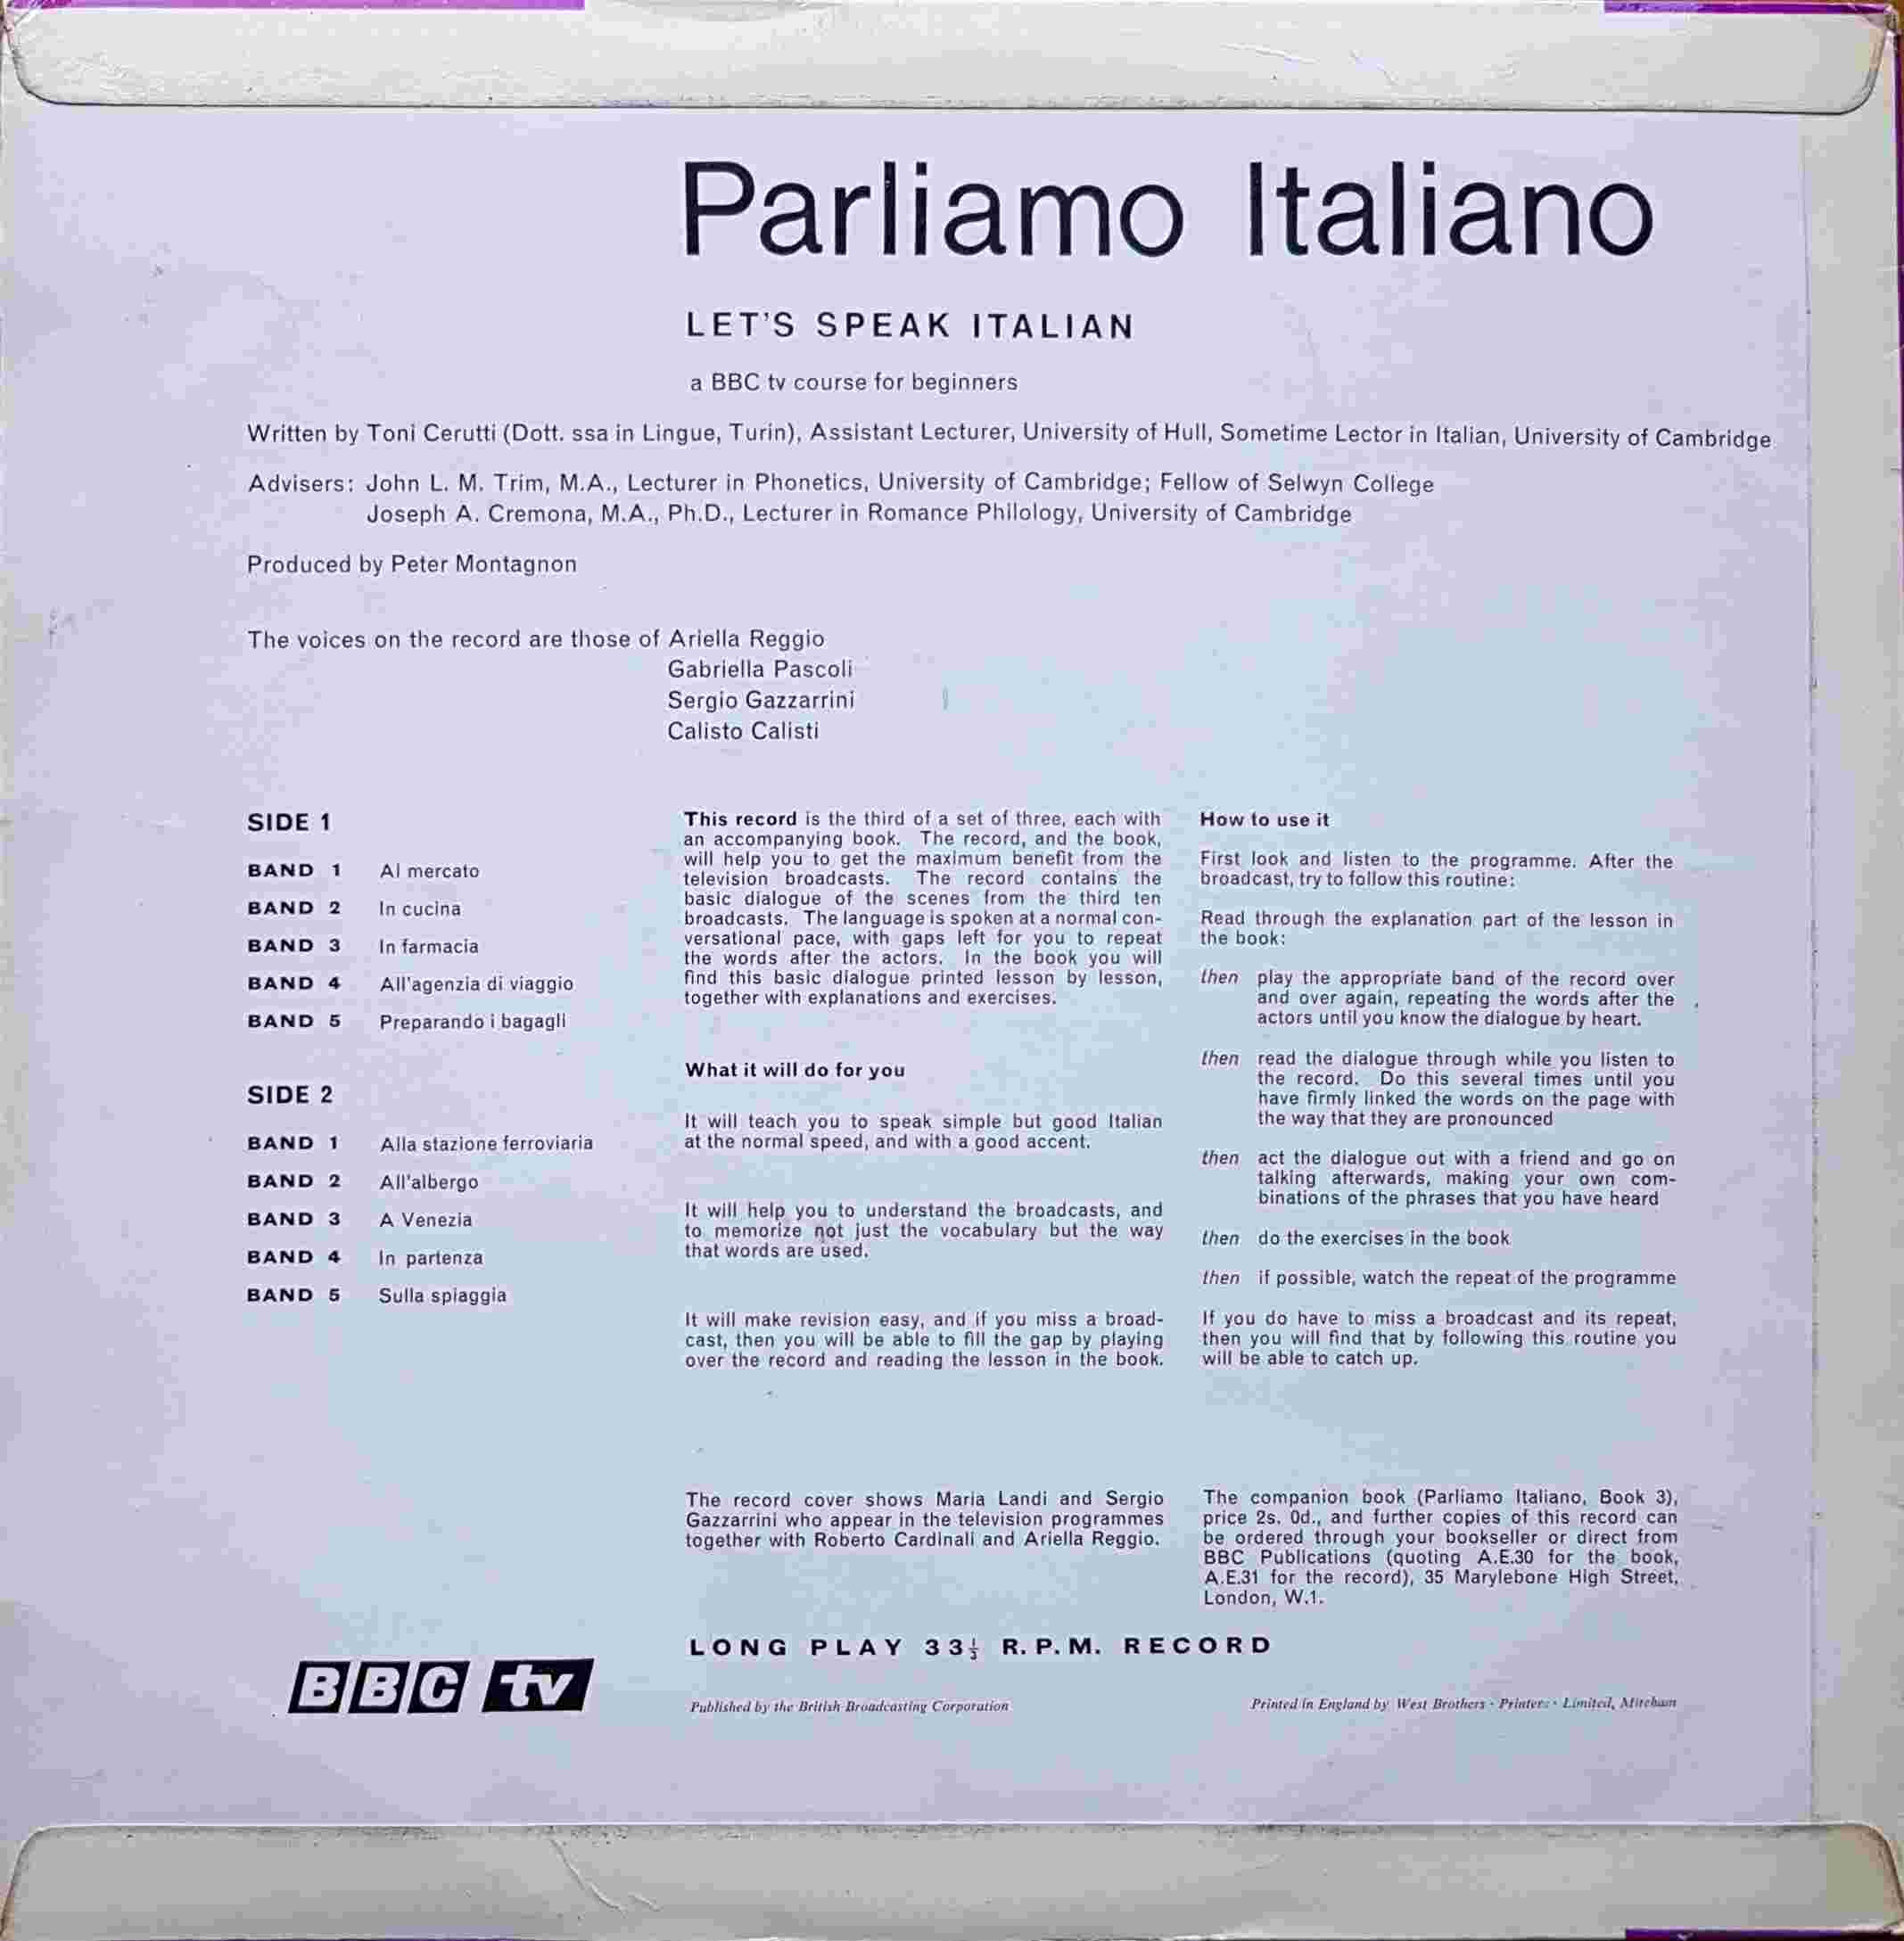 Picture of OP 5/6 Parliamo Italiano - Let's Speak Italian lessons 21 - 30 by artist Toni Cerutti from the BBC records and Tapes library